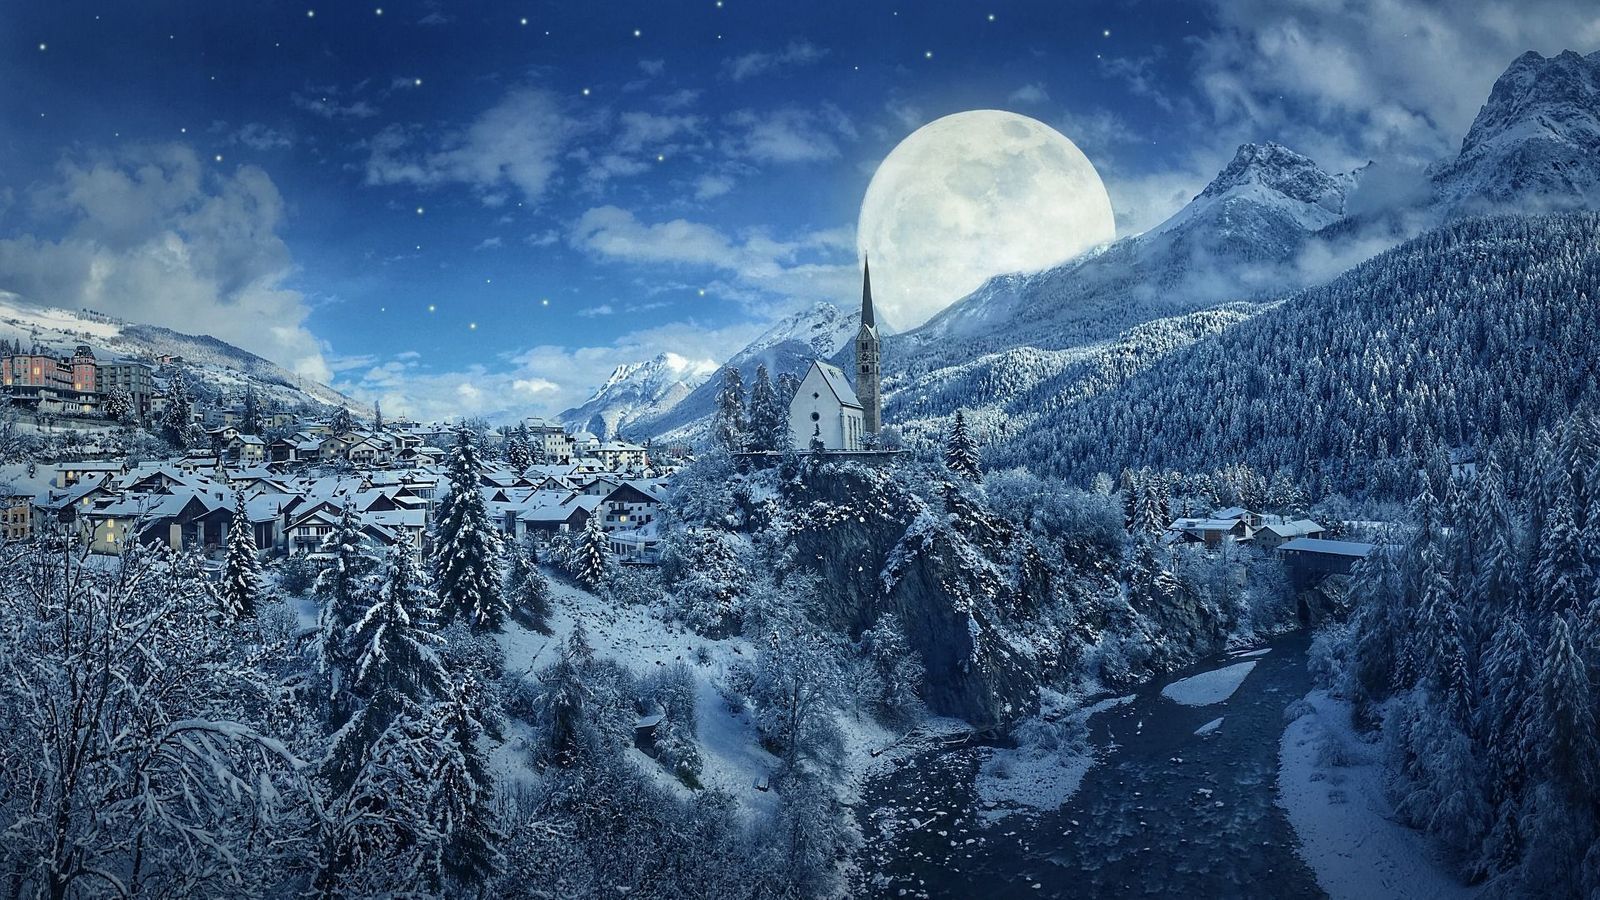 Winter Night Snow Mountains and Moon HD Wallpaper